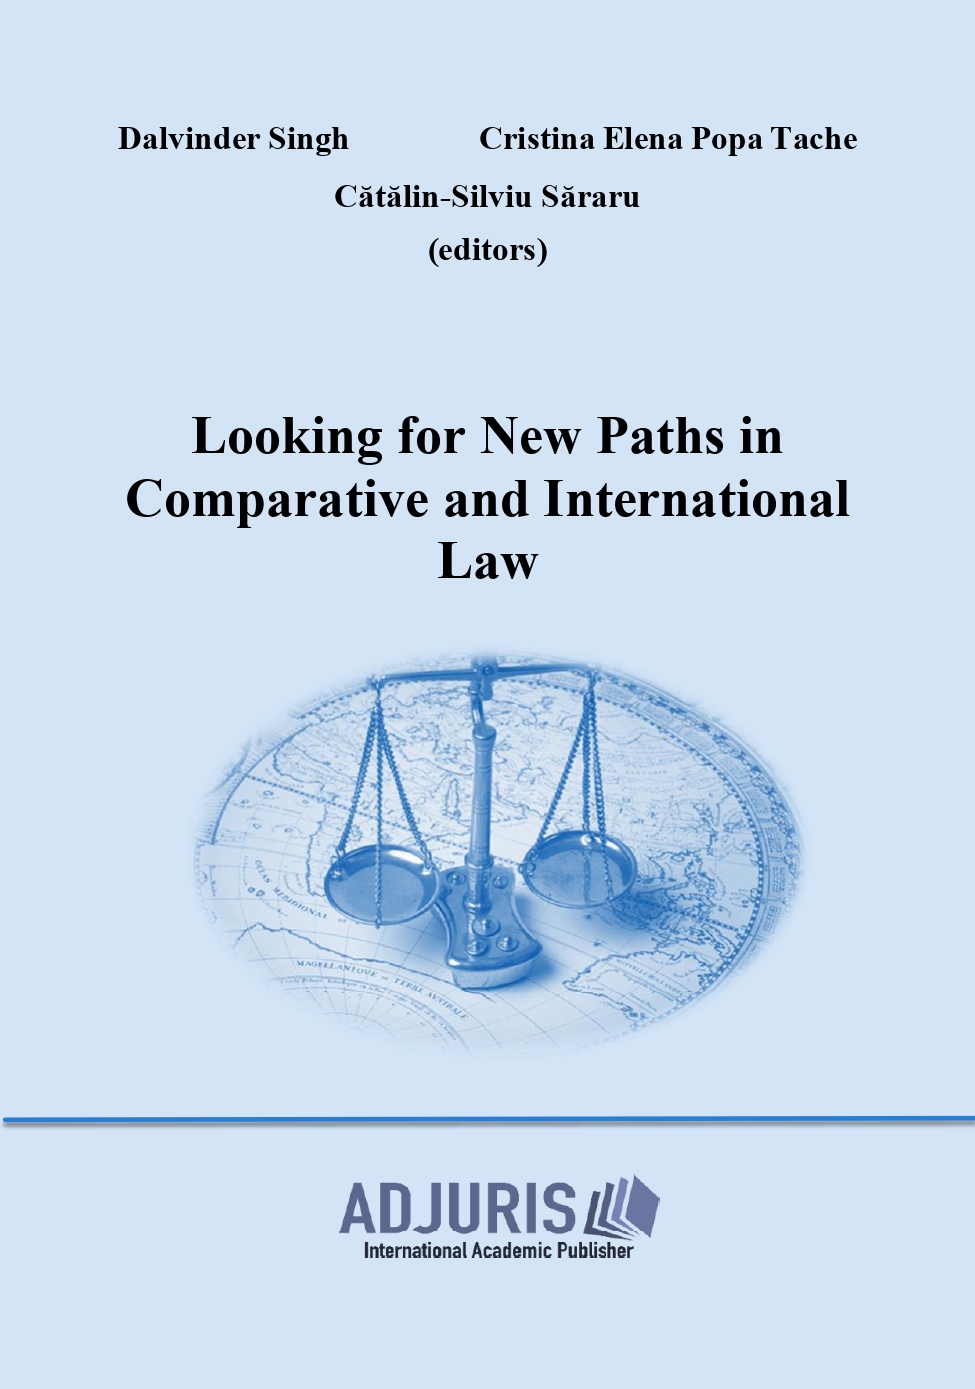 Looking for New Paths in Comparative and International Law